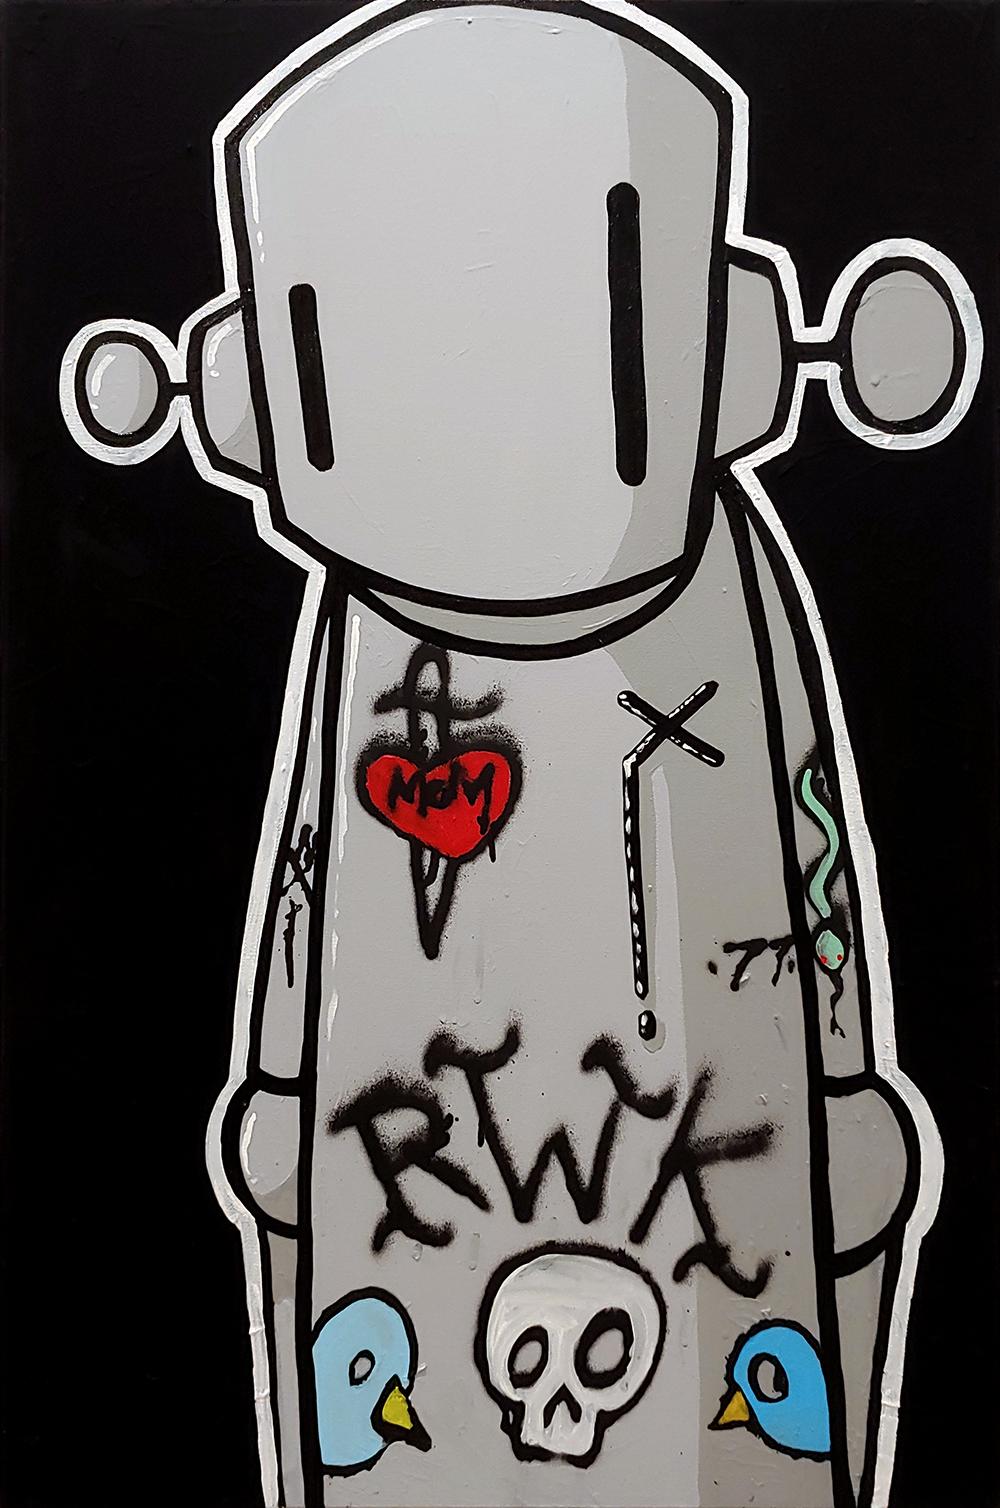 Chris RWK Figurative Painting - "Painted For Life"  The Tattooed Robot 36x24 acrylic on Canvas